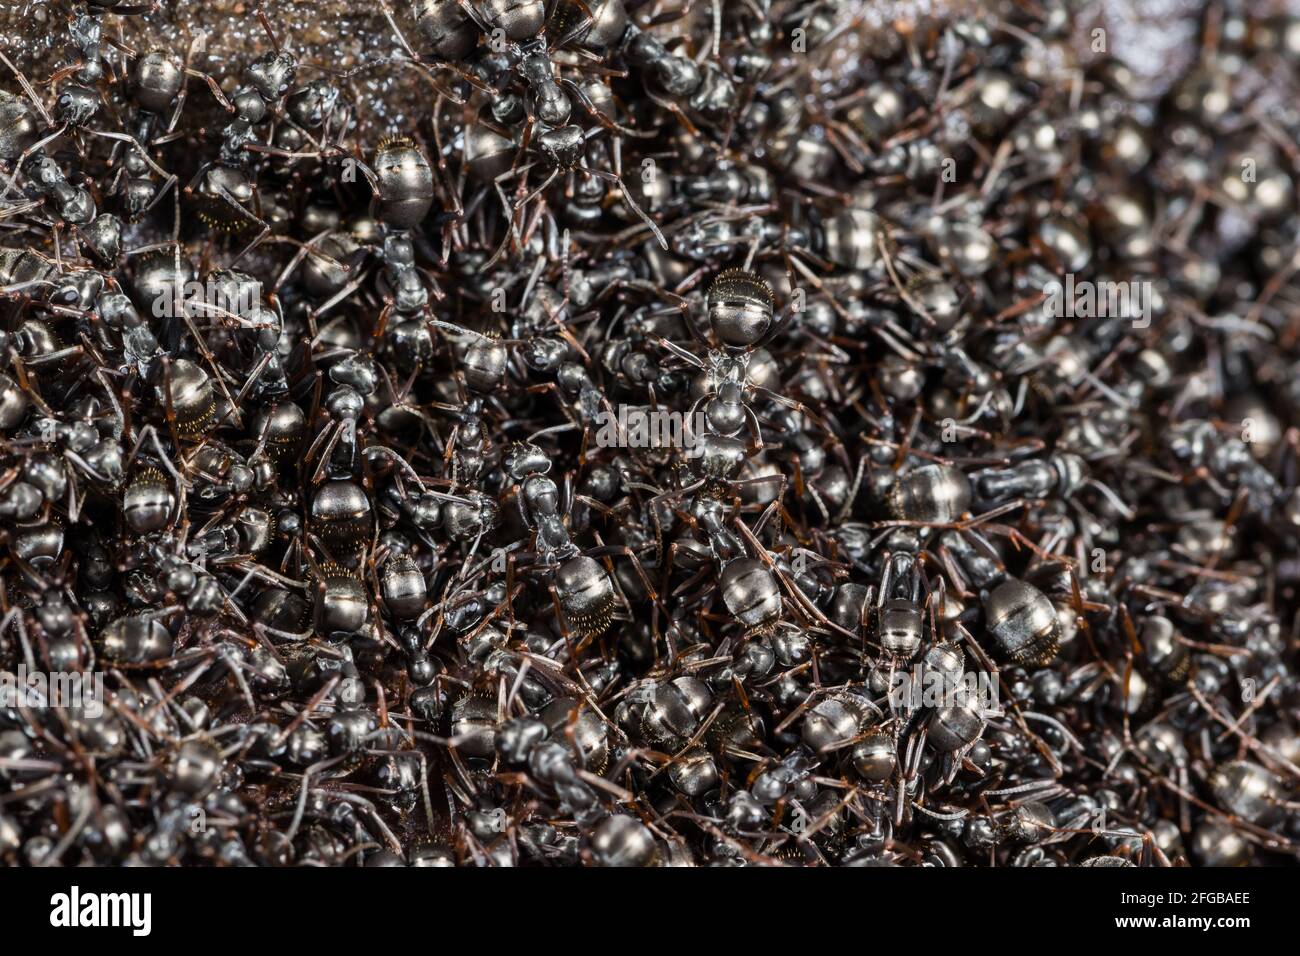 Black-colored ants in their nest (Formica fusca) Stock Photo